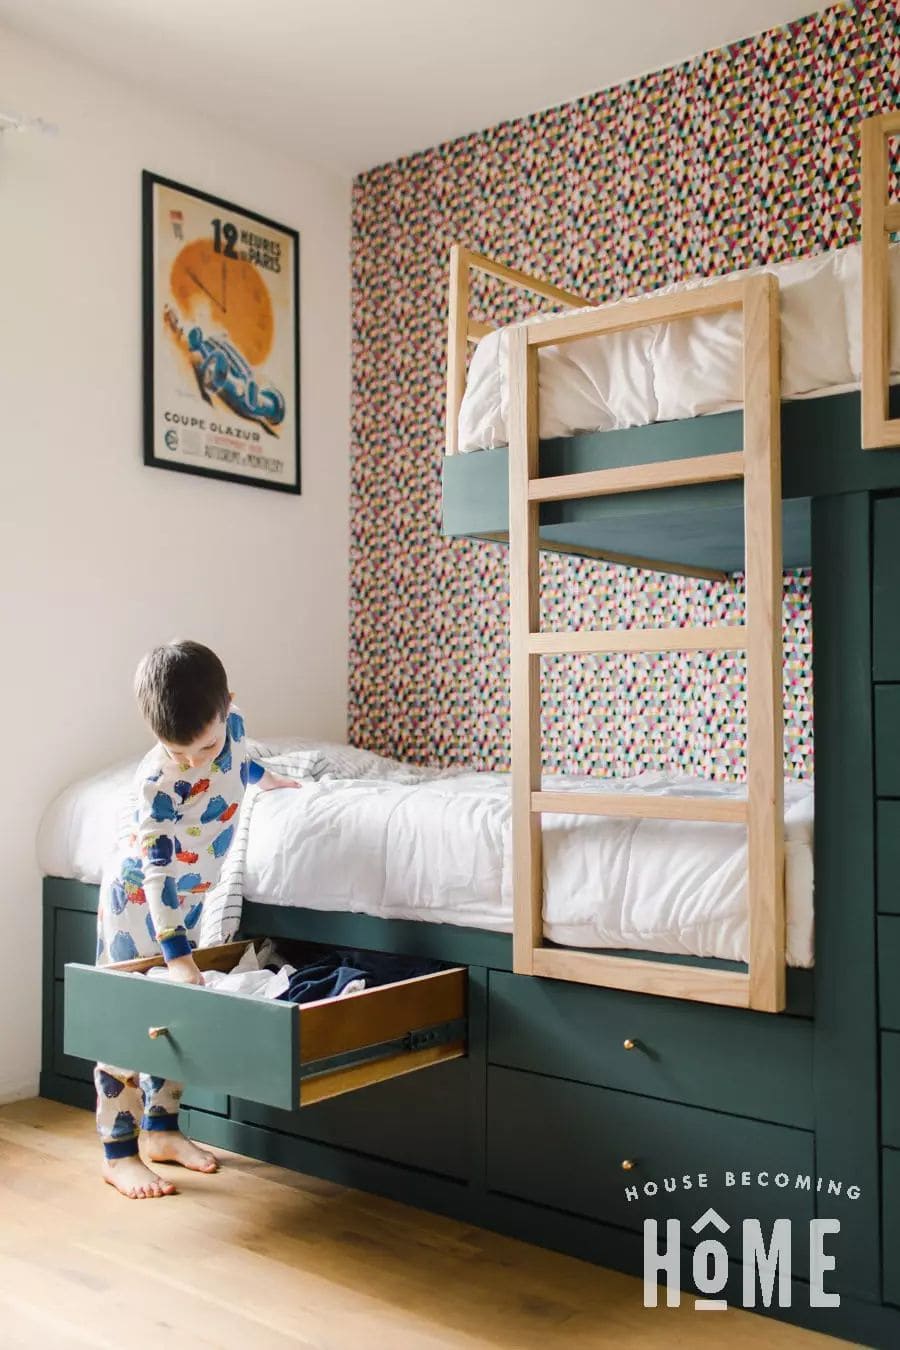 25 fantastic built-in bed ideas for children's rooms - 77